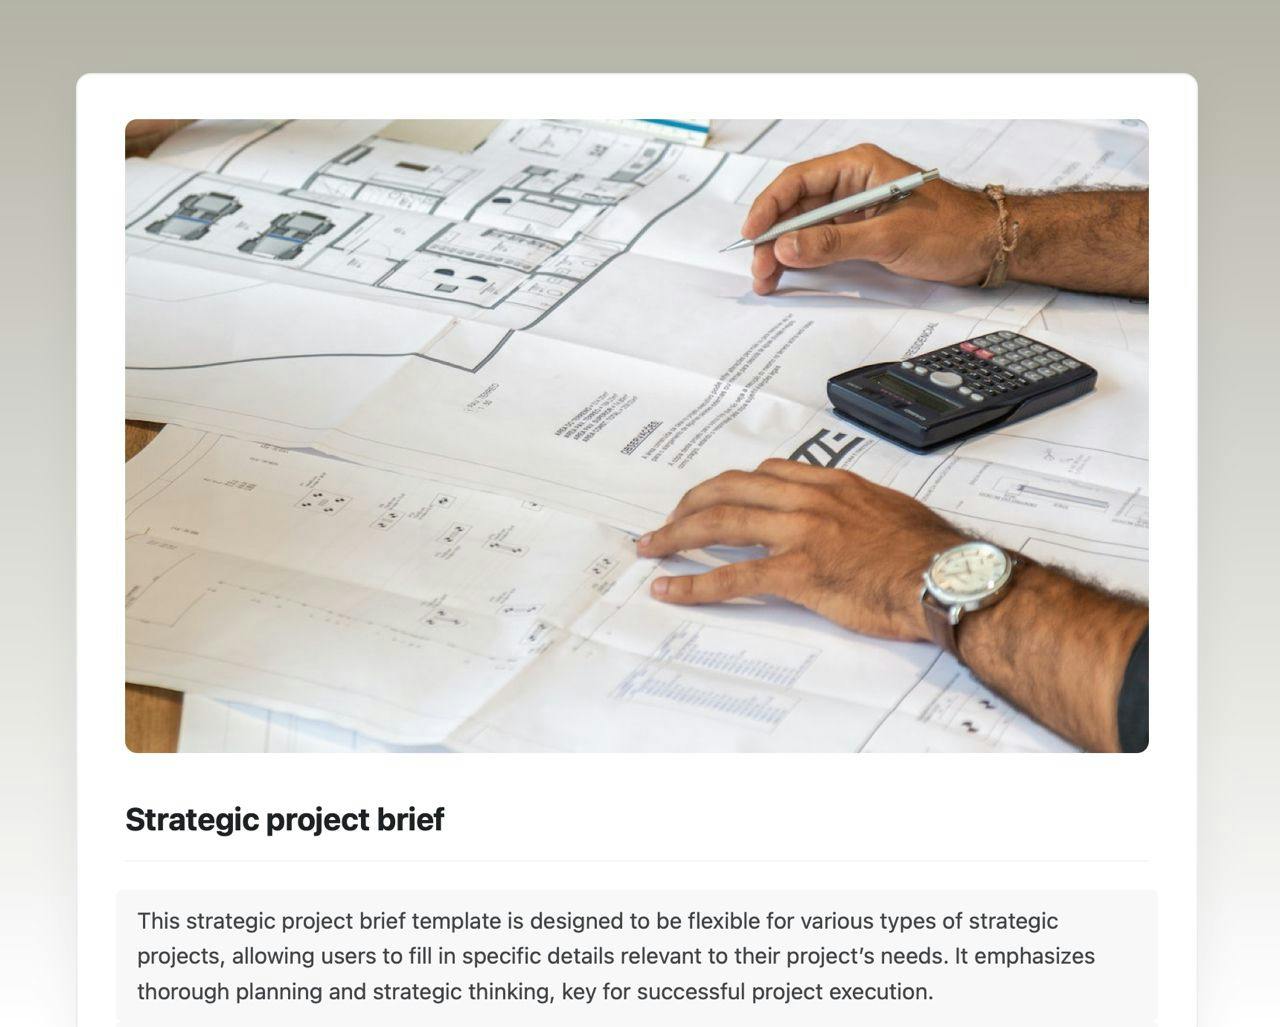 Strategic project brief template in Craft showing instructions.